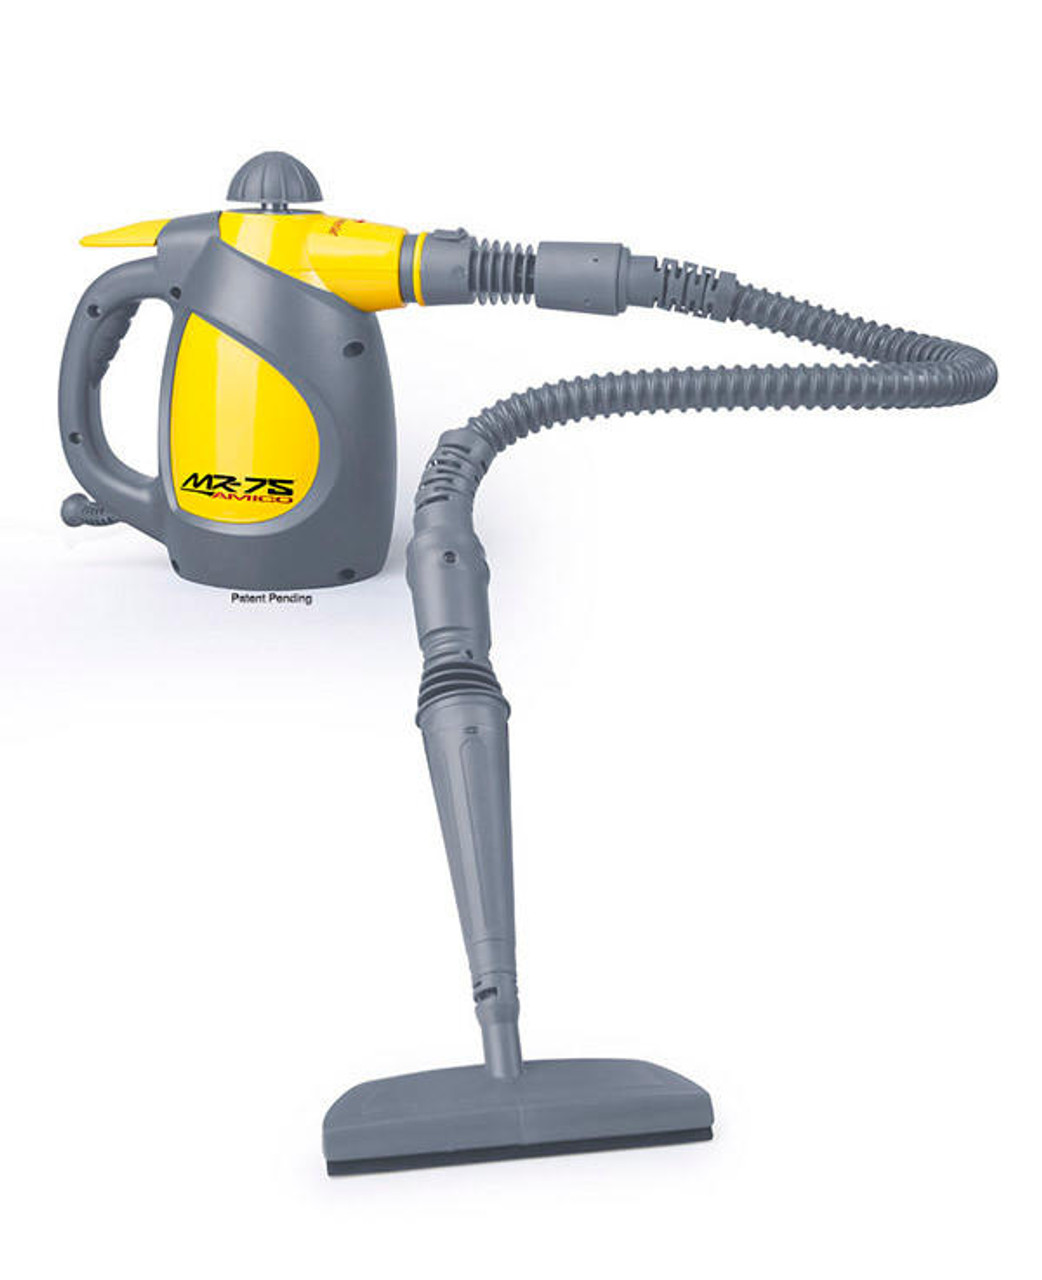 https://cdn11.bigcommerce.com/s-ndtdat03b2/images/stencil/1280x1280/products/12139/18827/vapamore-mr-75-amico-handheld-steam-cleaner__23110.1663866093.jpg?c=1